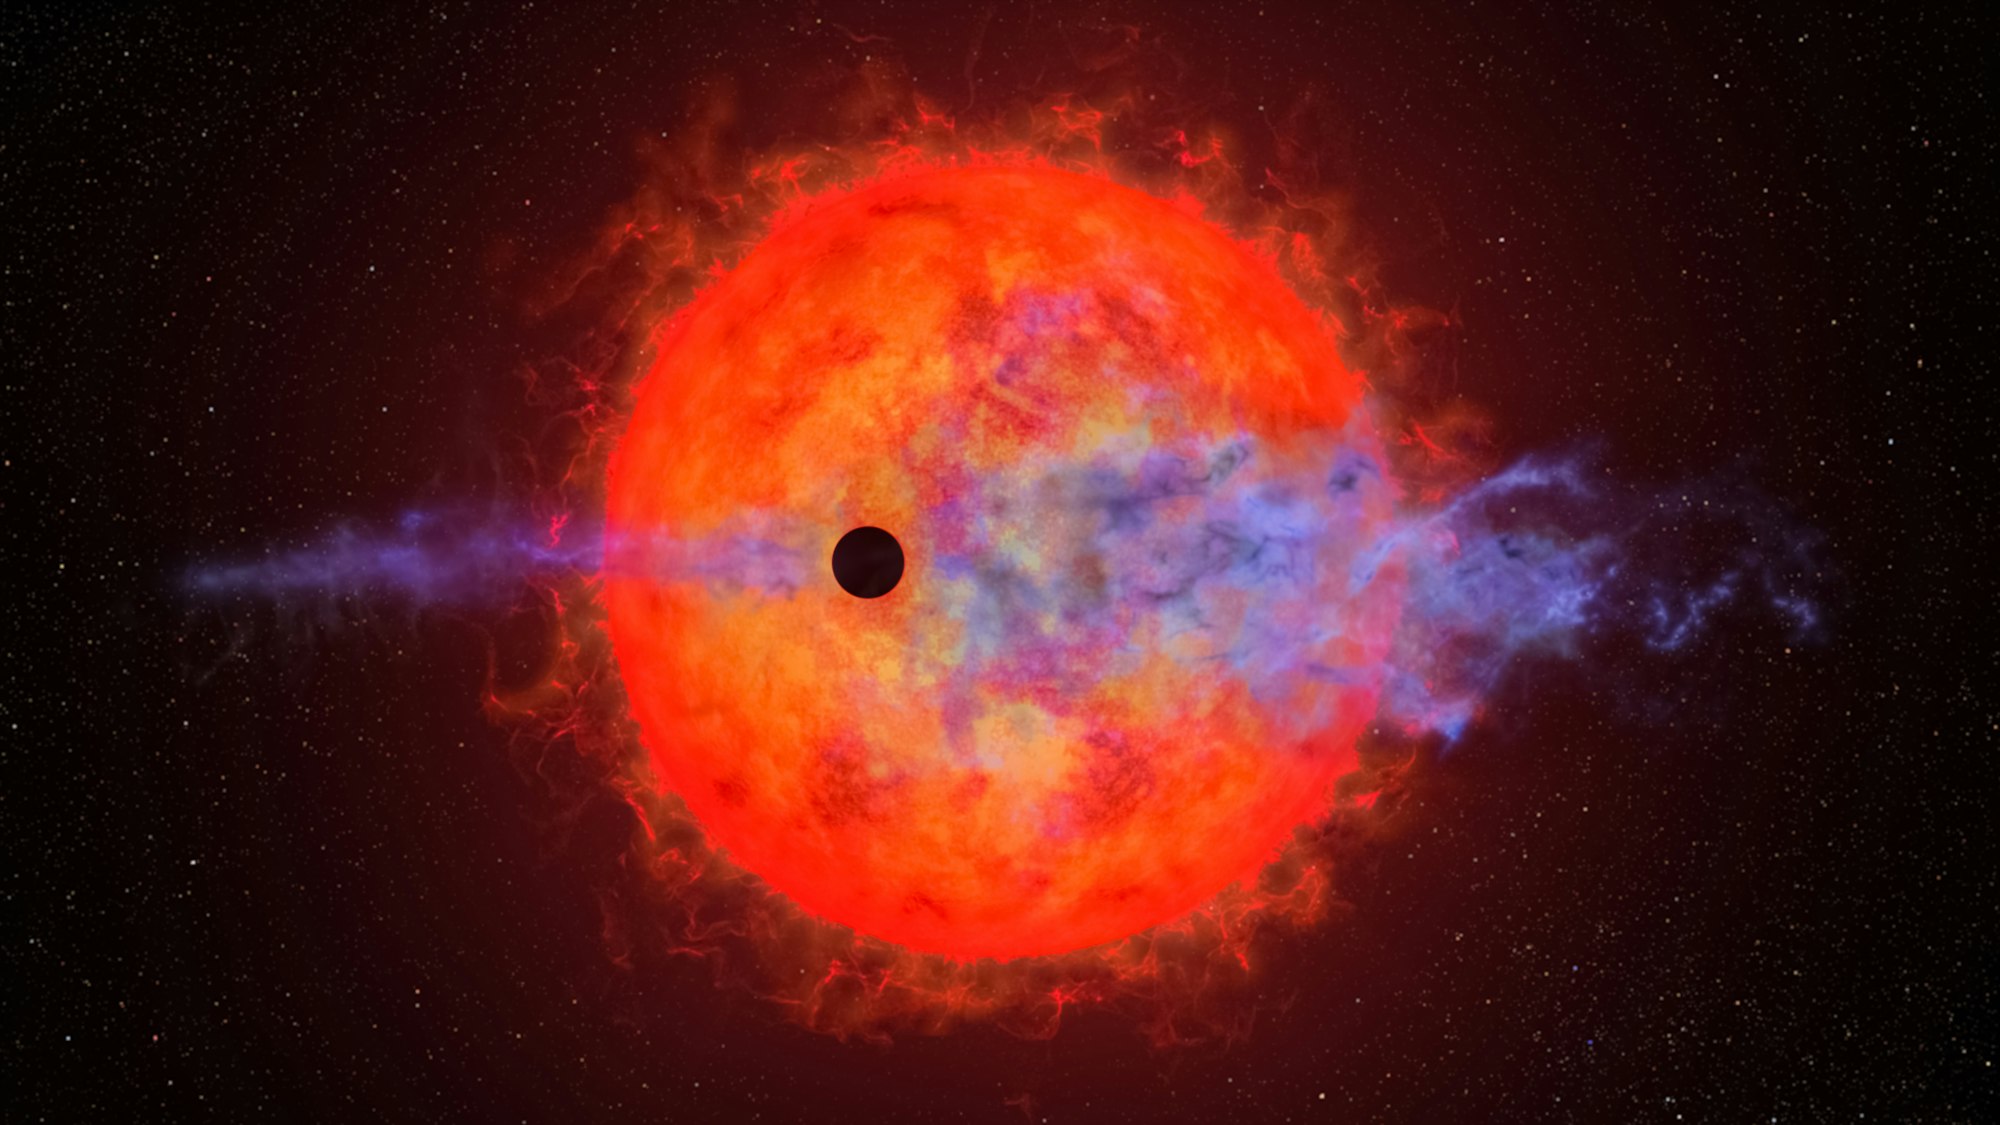 a black hole in the center of a red and blue star